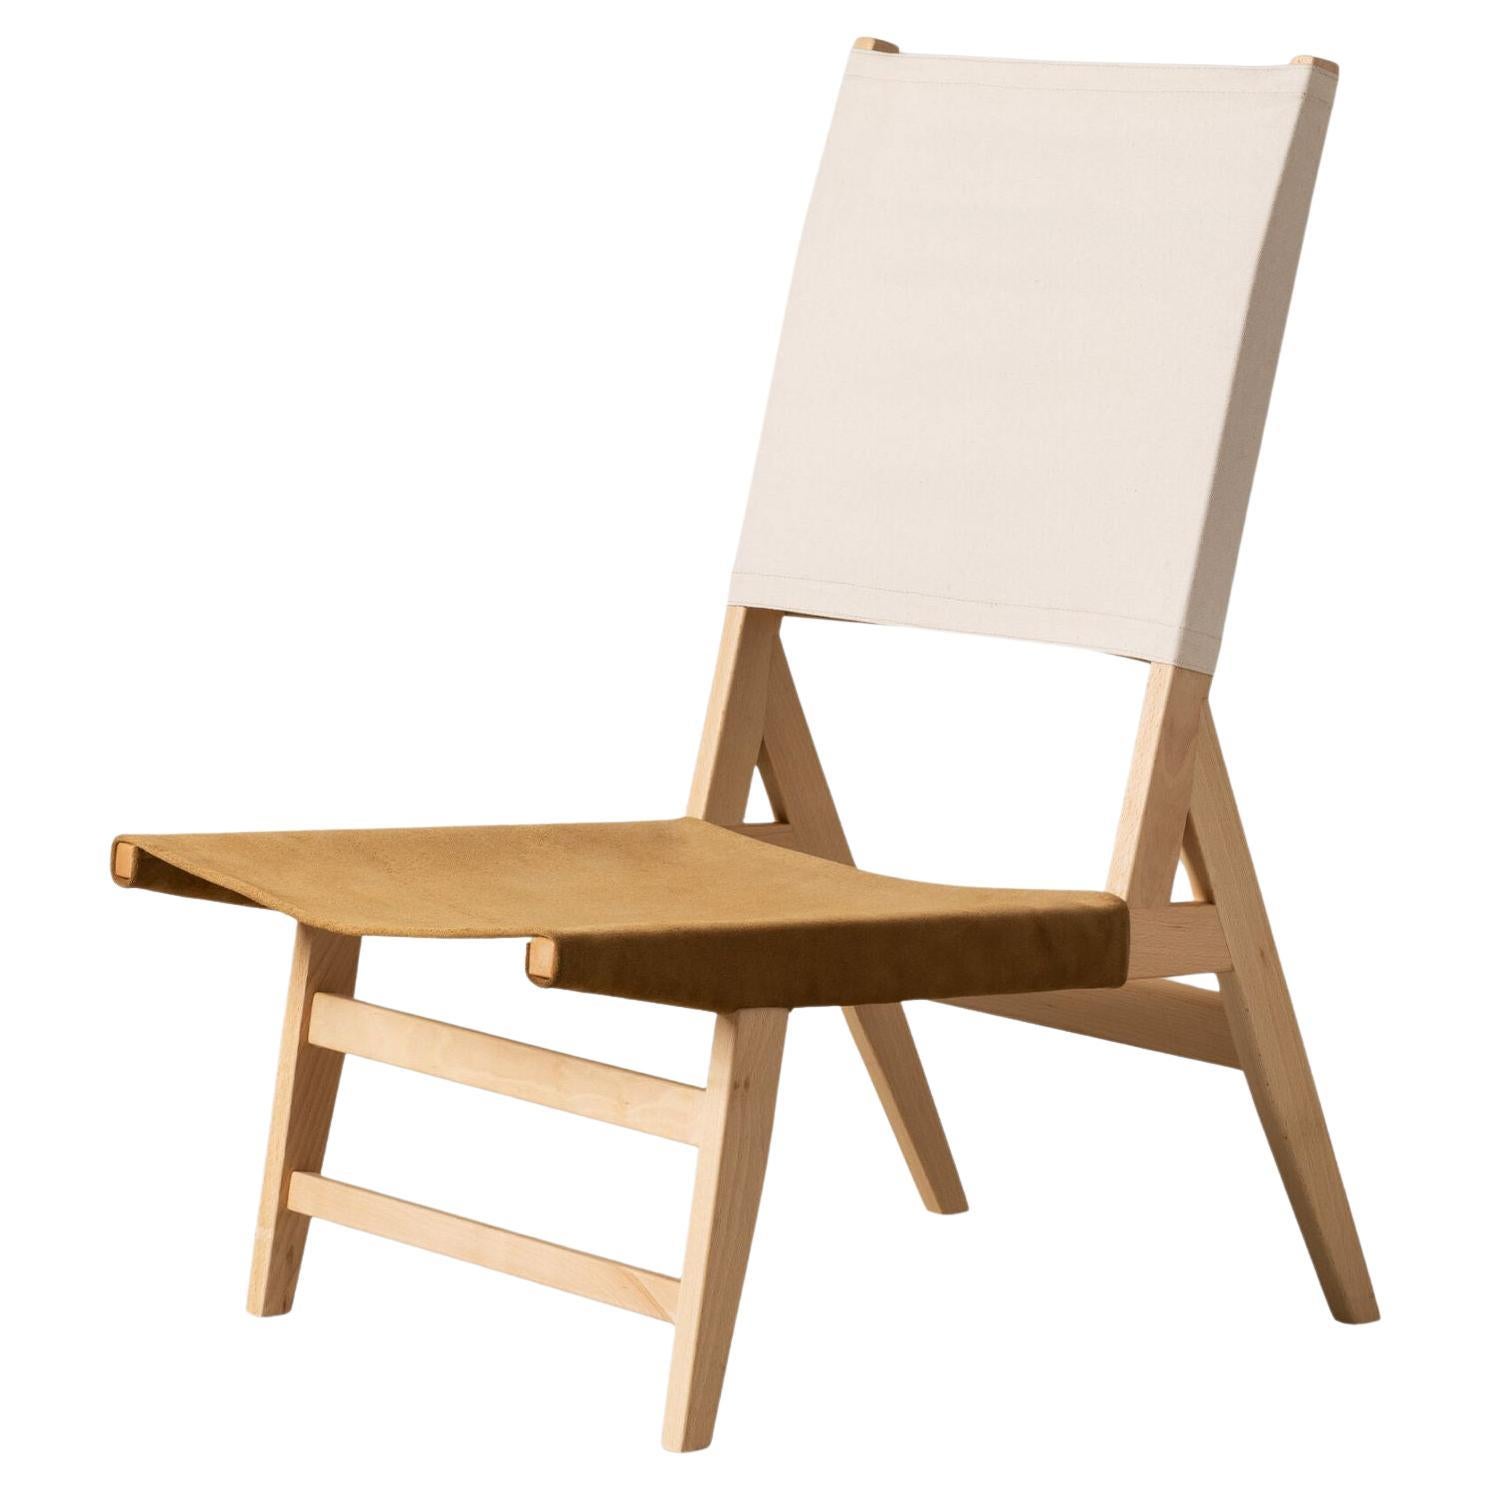 Correa & Milá 'Barceloneta' Outdoor Chair in Leather and Canvas for Santa & Cole For Sale